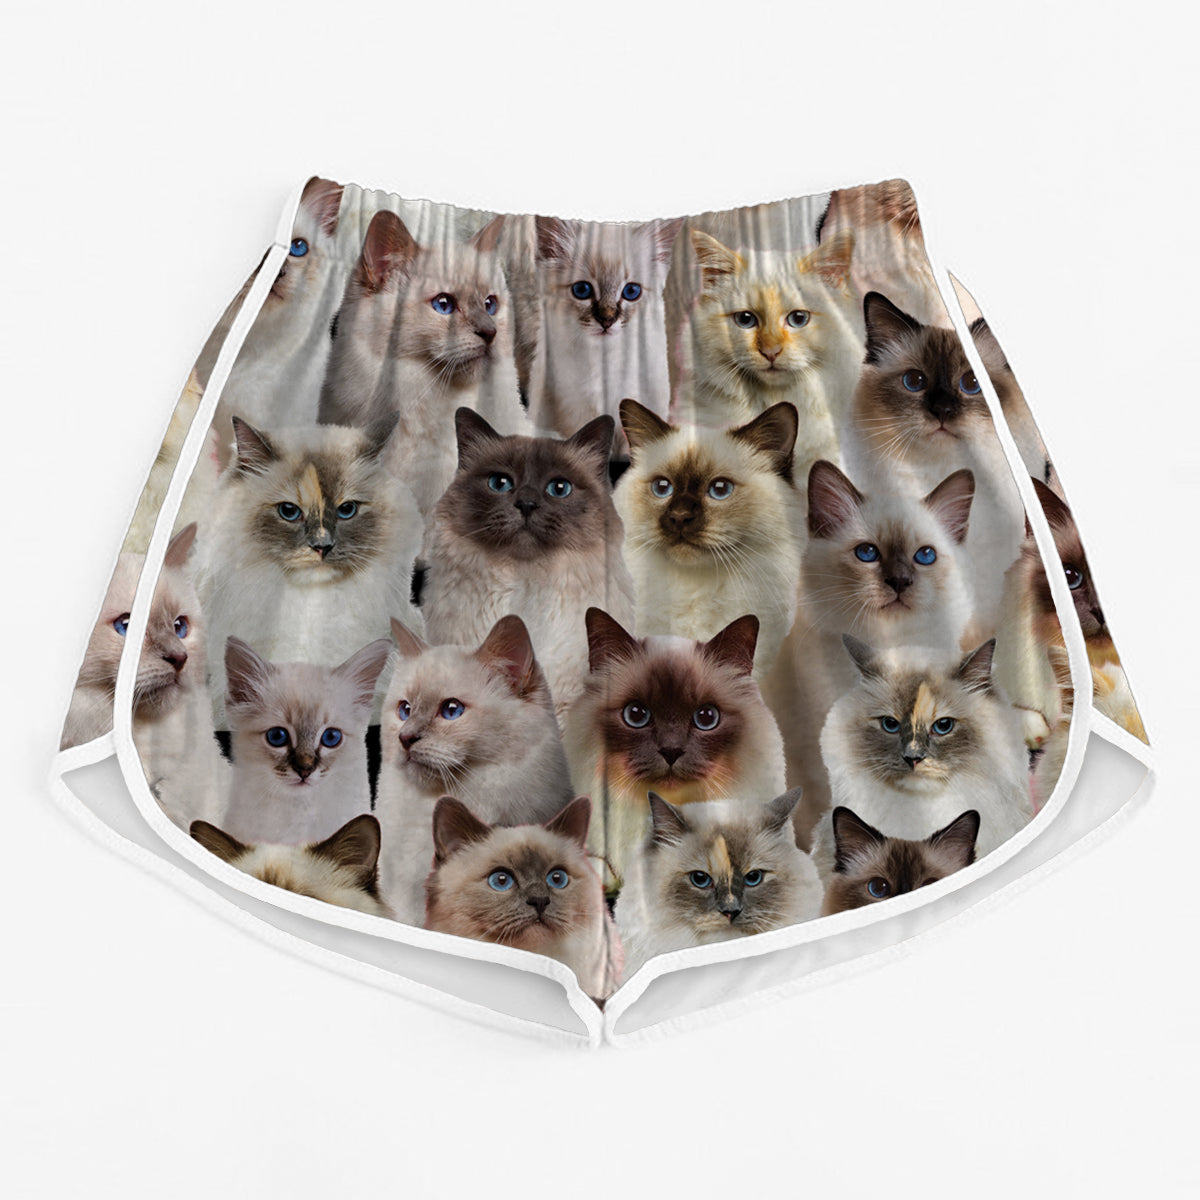 You Will Have A Bunch Of Birman Cats - Women's Running Shorts V1